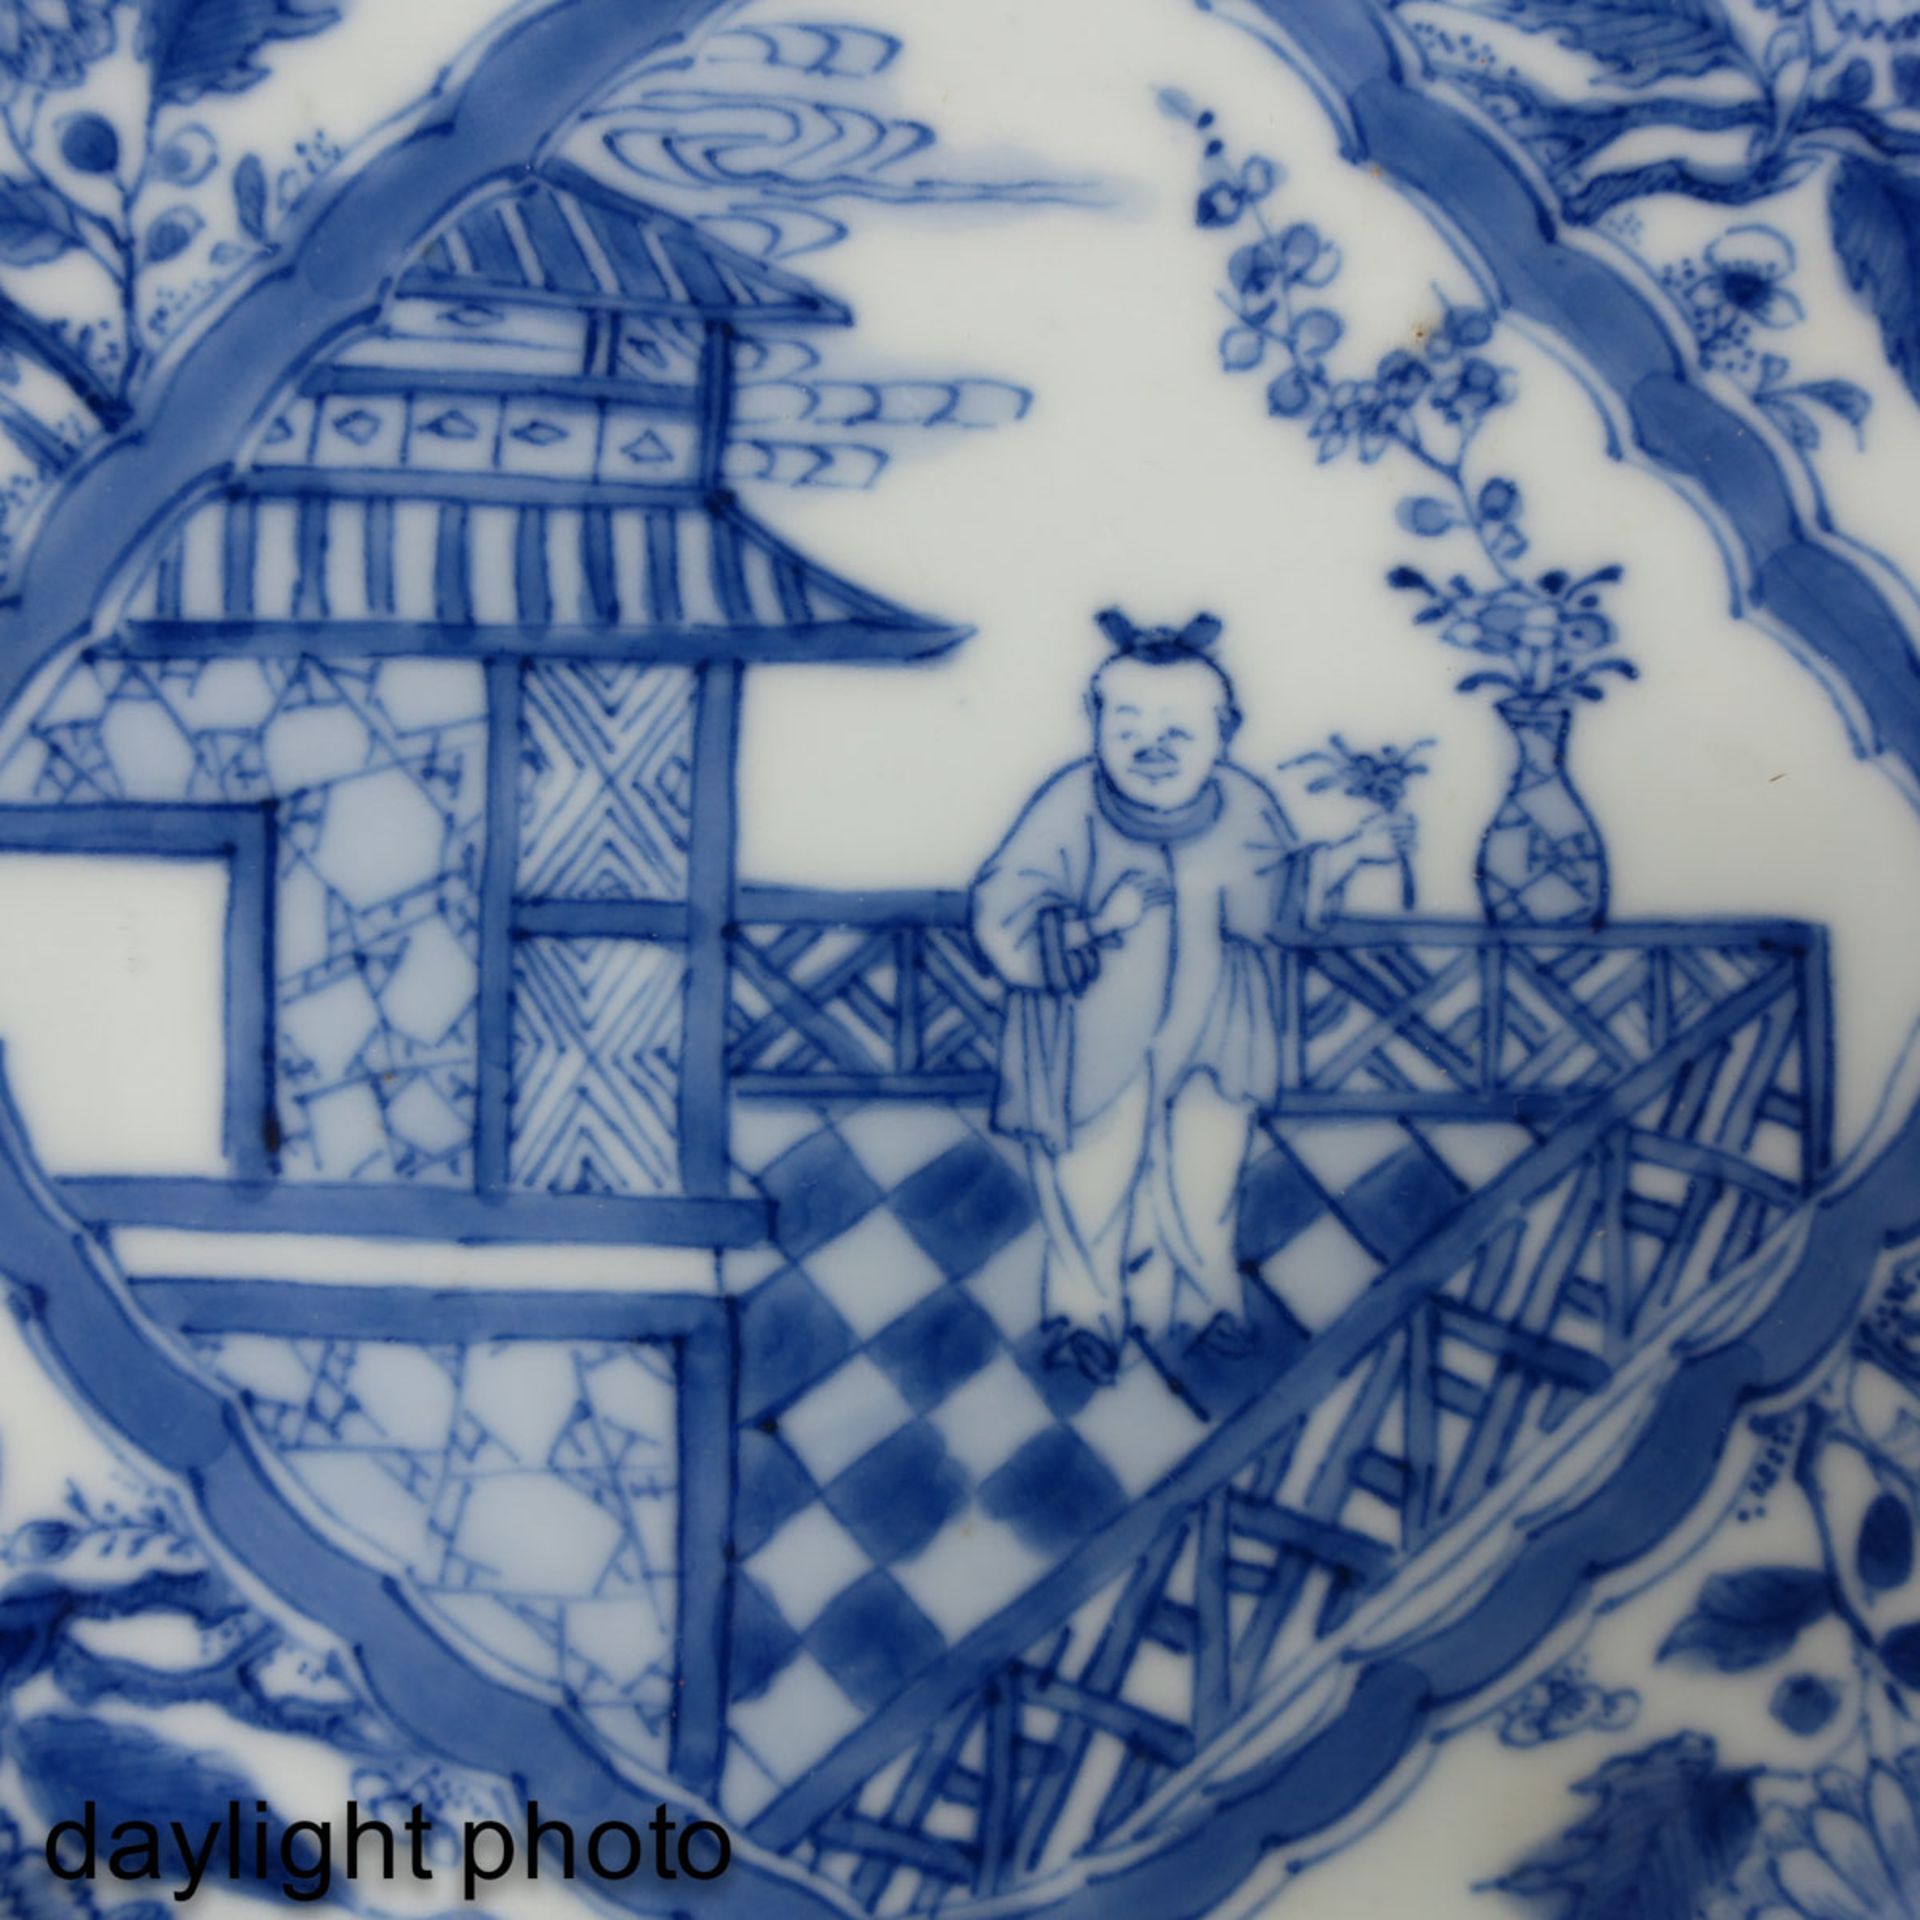 A Series of 4 Blue and white Plates - Image 9 of 9